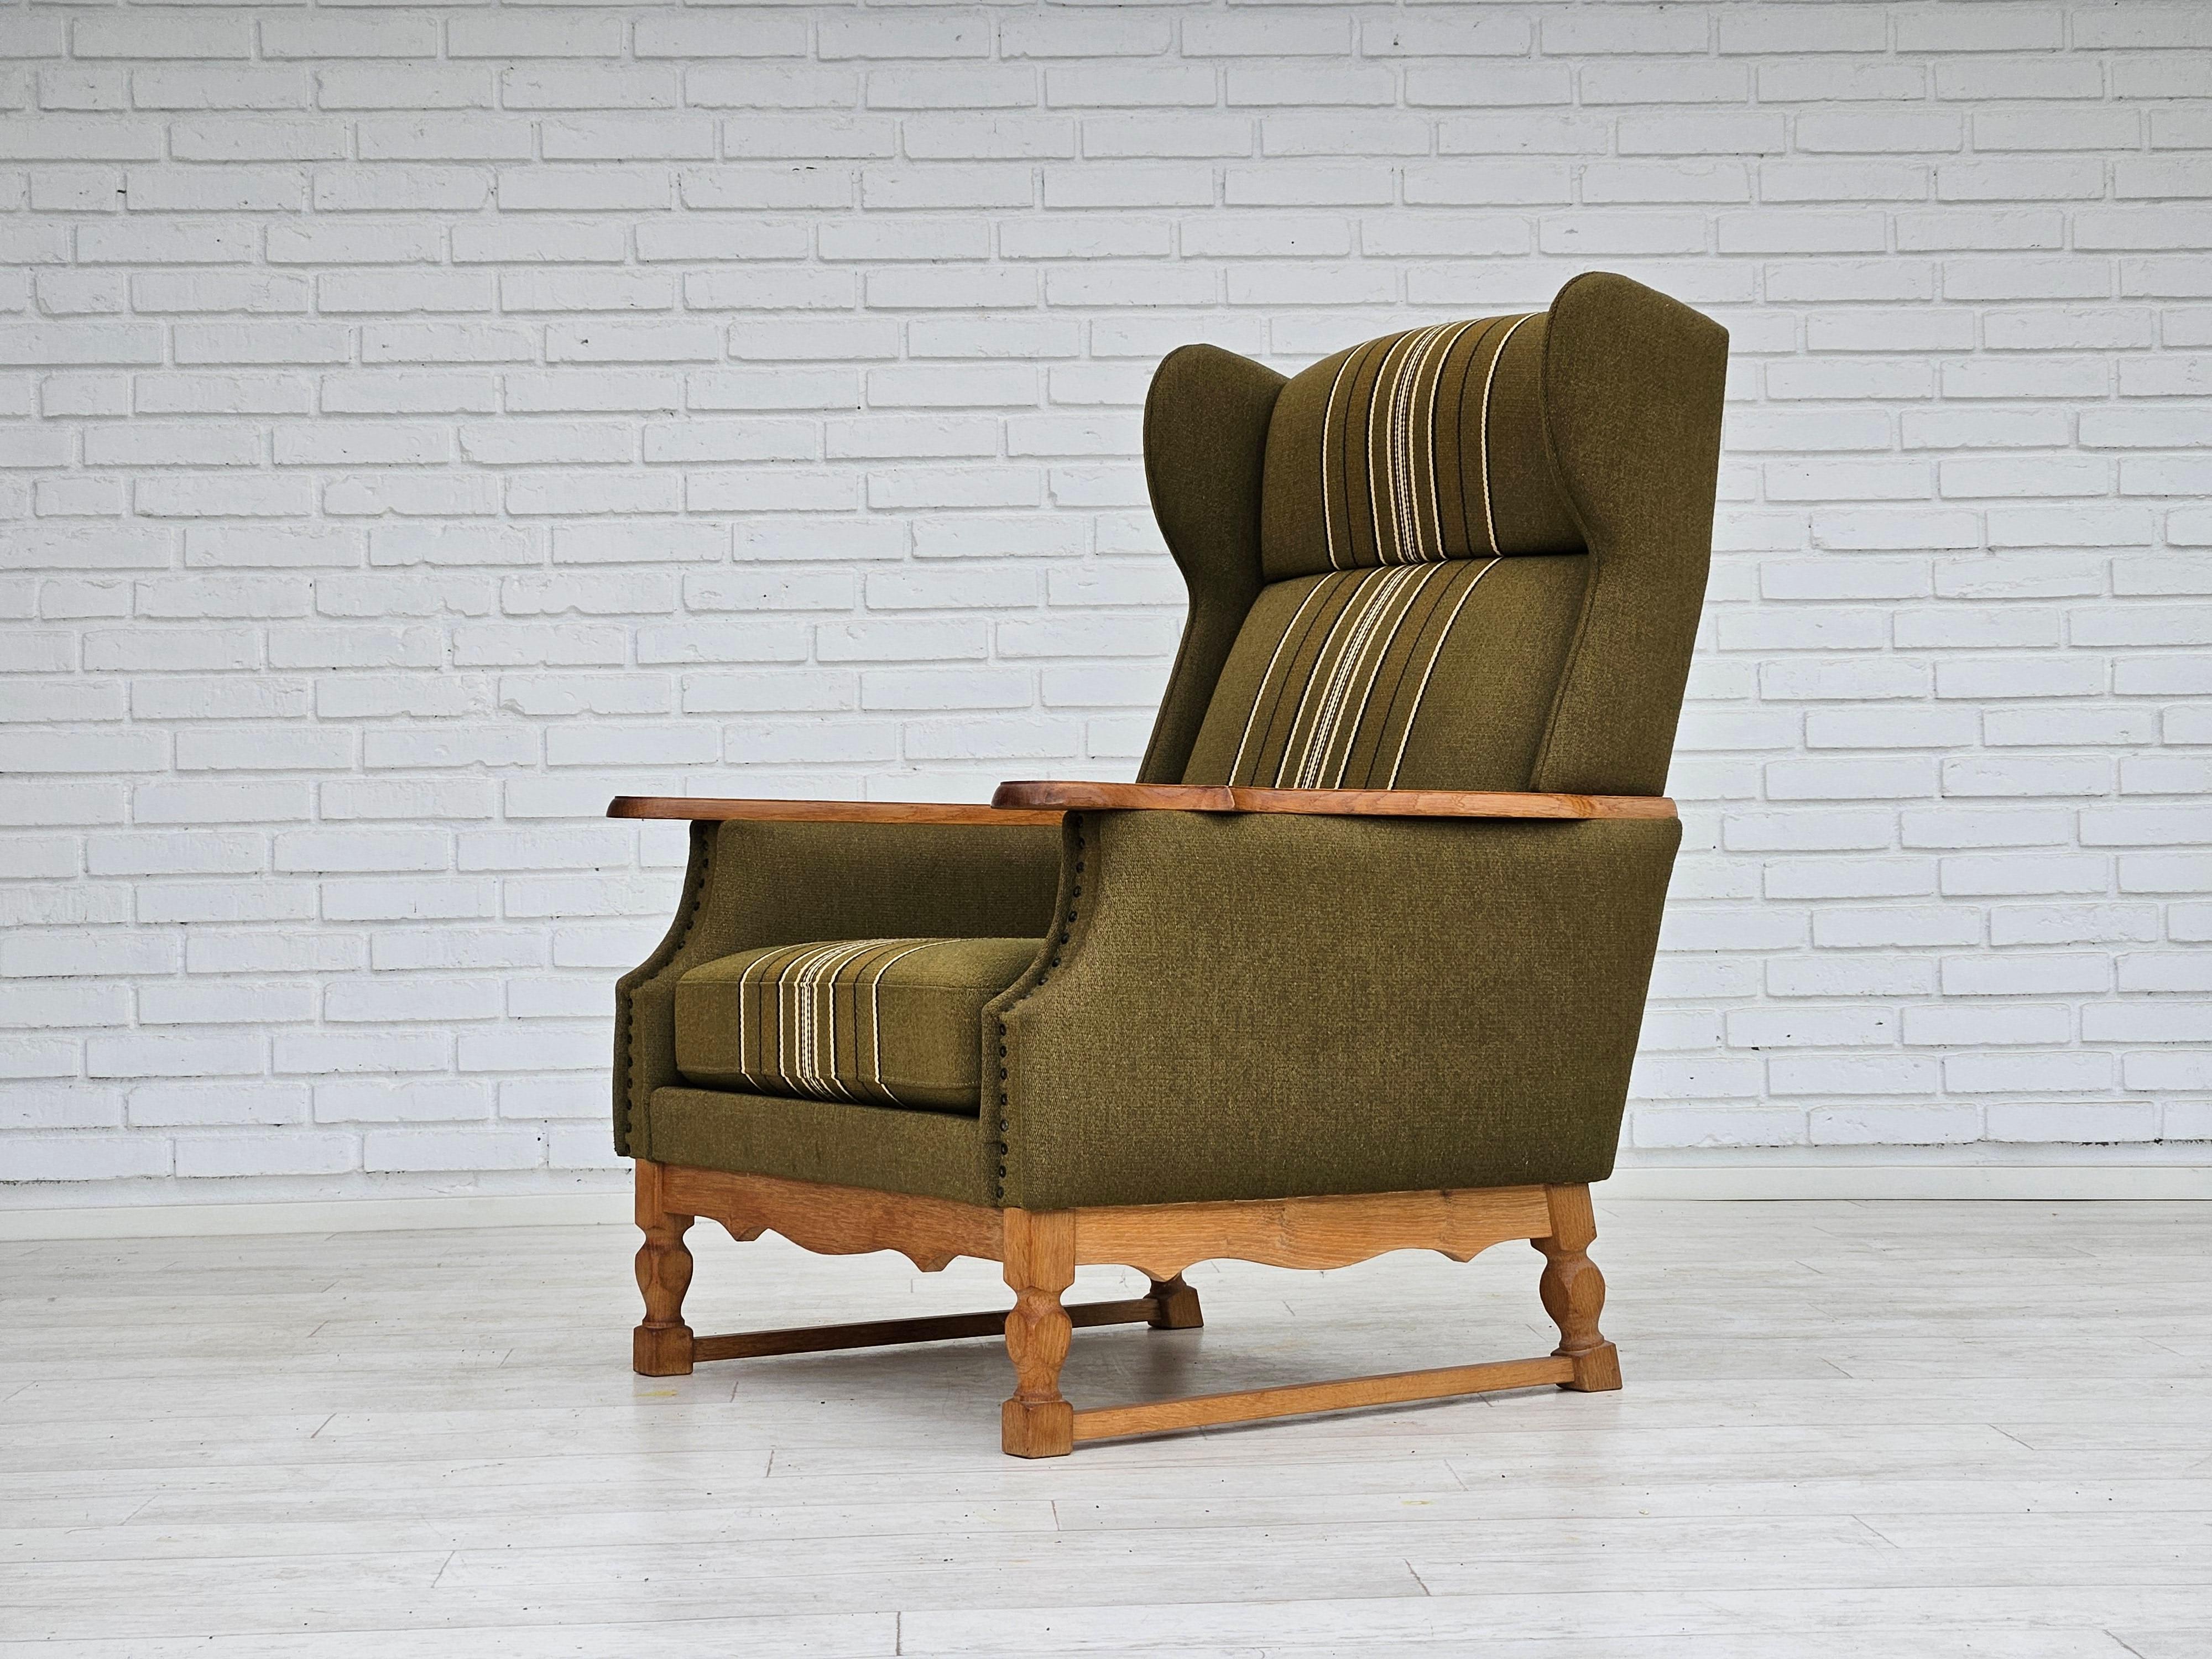 1970s, Danish wingback chair. Original very good condition: no smells and no stains. Green furniture wool, oak wood. Springs in the seat cushion. Manufactured by Danish furniture manufacturer in about 1970s.